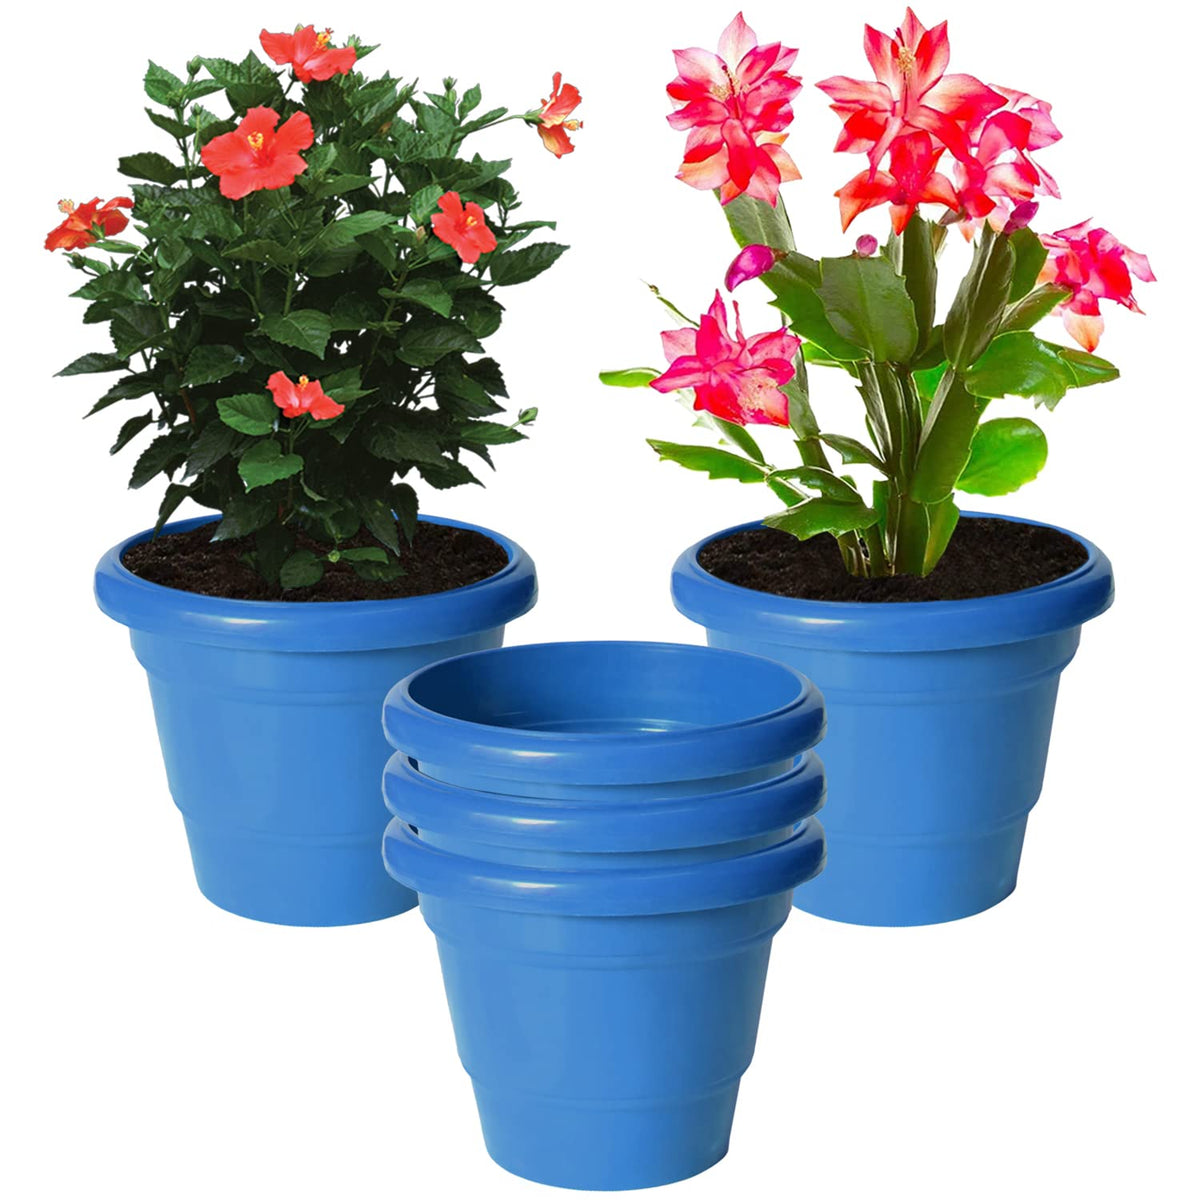 Kuber Industries Solid 2 Layered Plastic Flower Pot|Gamla for Home Decor,Nursery,Balcony,Garden,8"x 6",Pack of 5 (Blue)